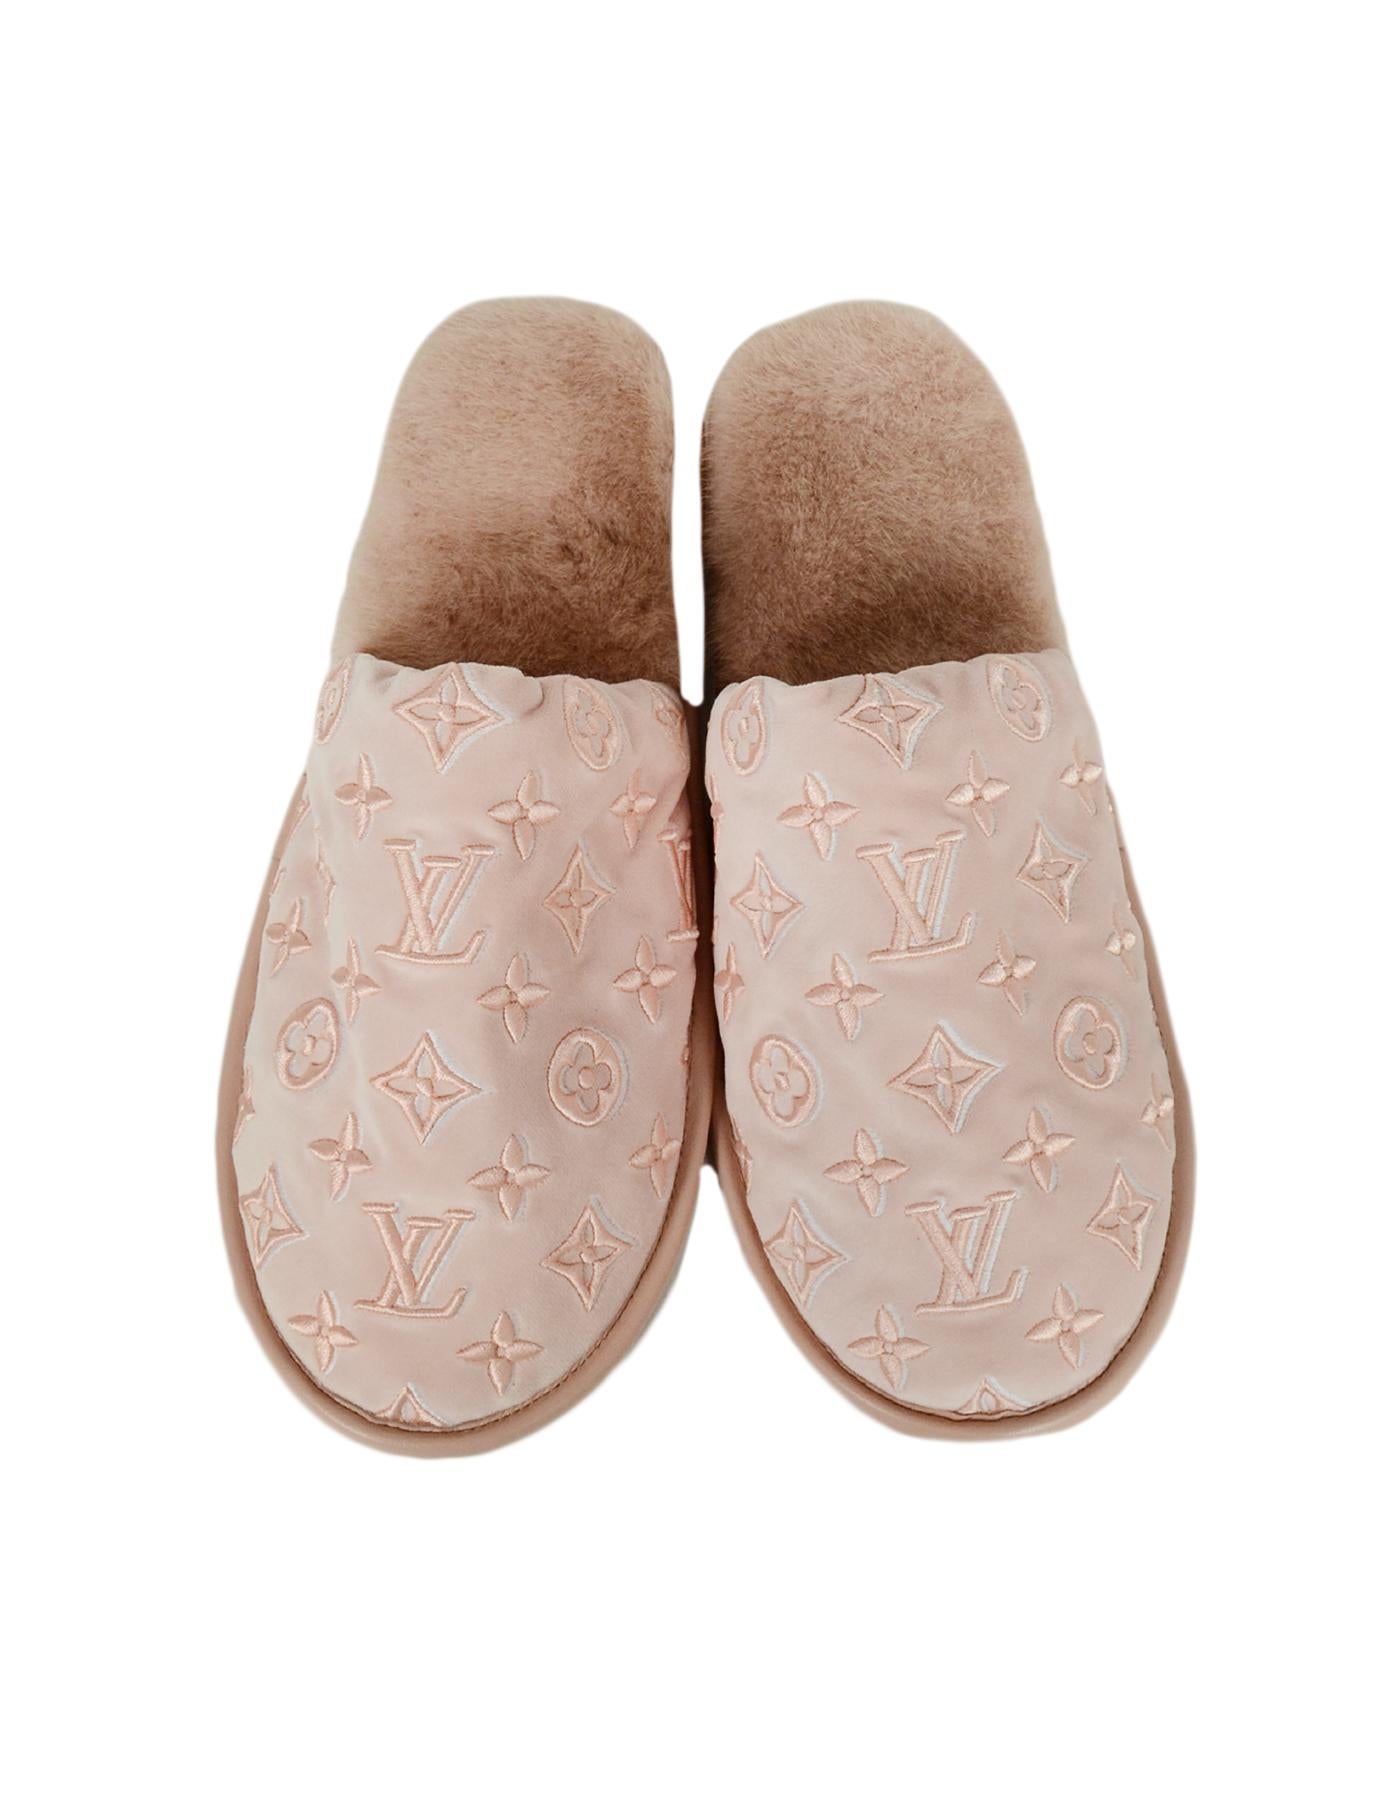 louis vuitton pink slippers